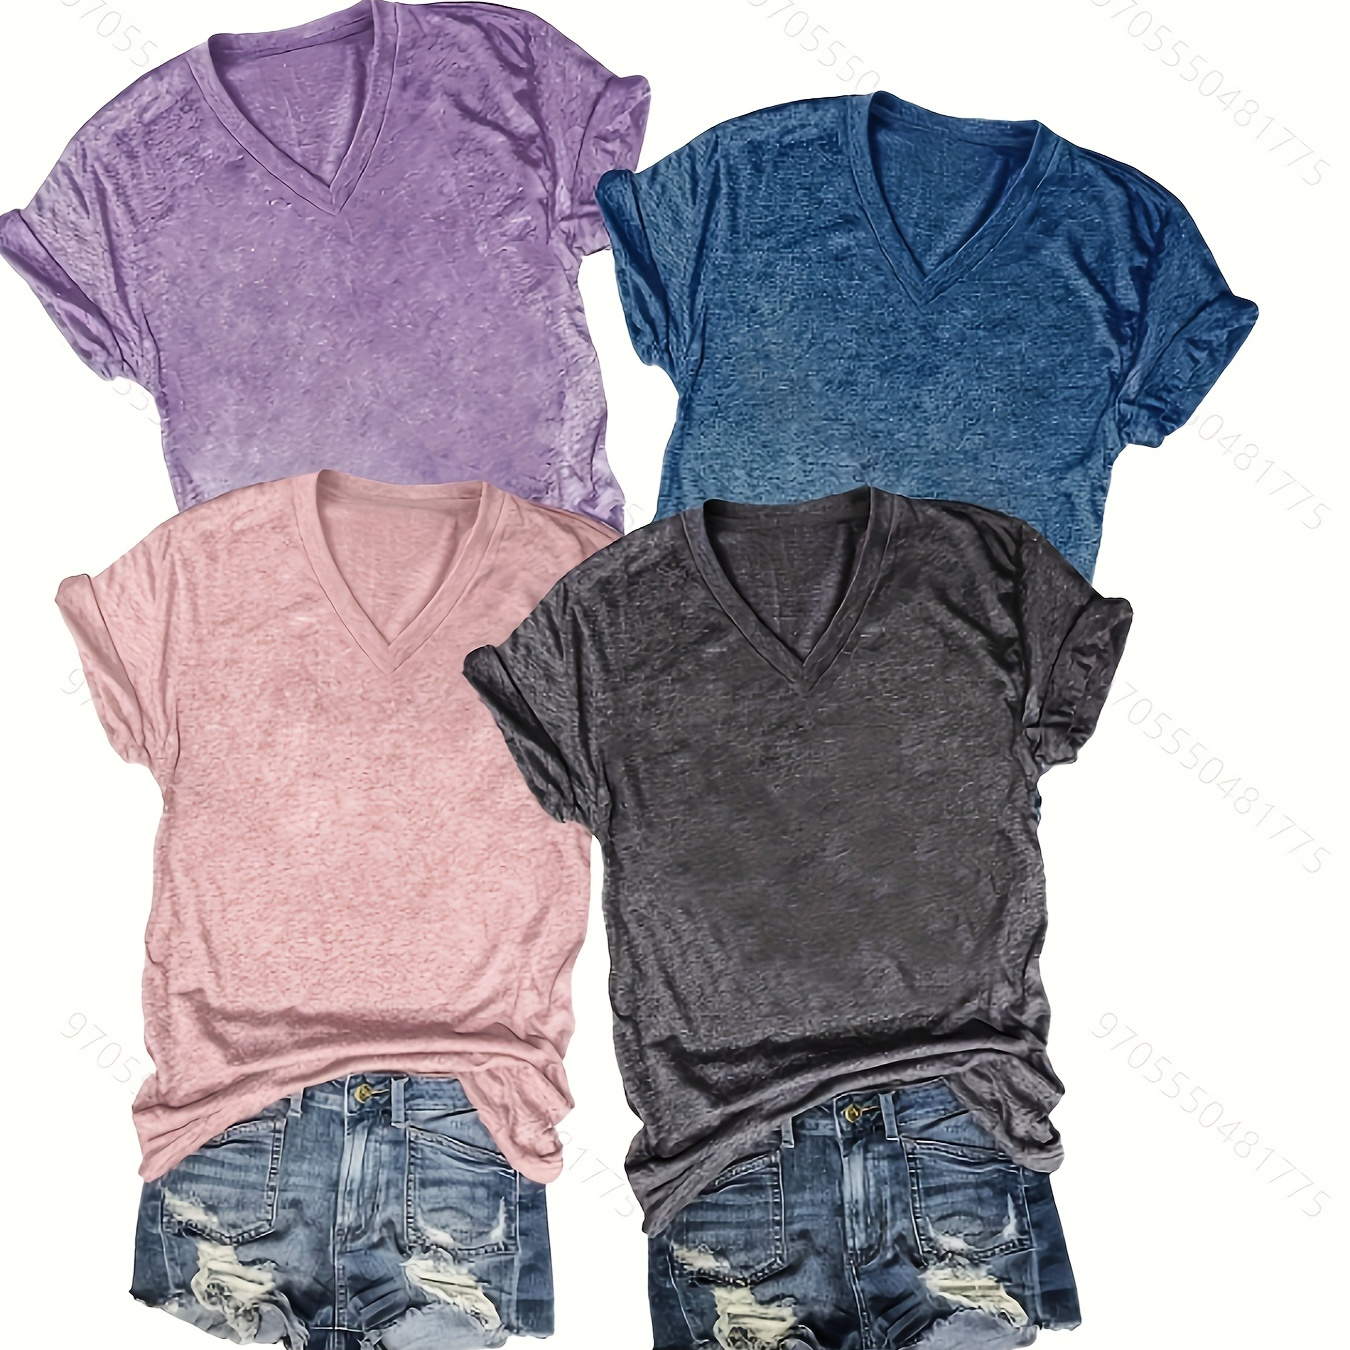 

Solid Color T-shirt 4 Pack, Casual Crew Neck Short Sleeve T-shirt For Spring & Summer, Women's Clothing